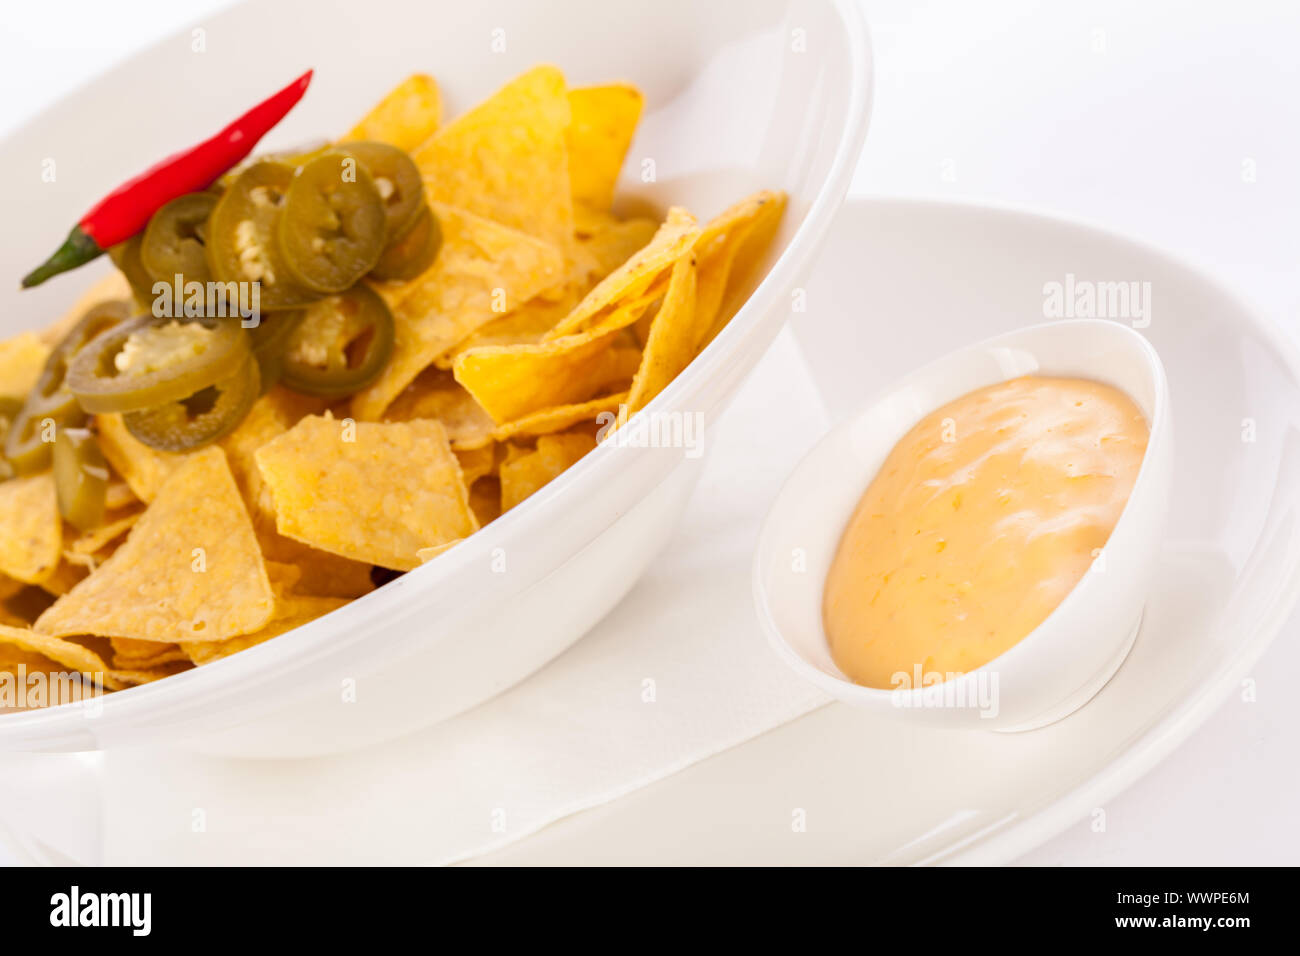 Nachos with cheese sauce and chilli pepperoni Stock Photo